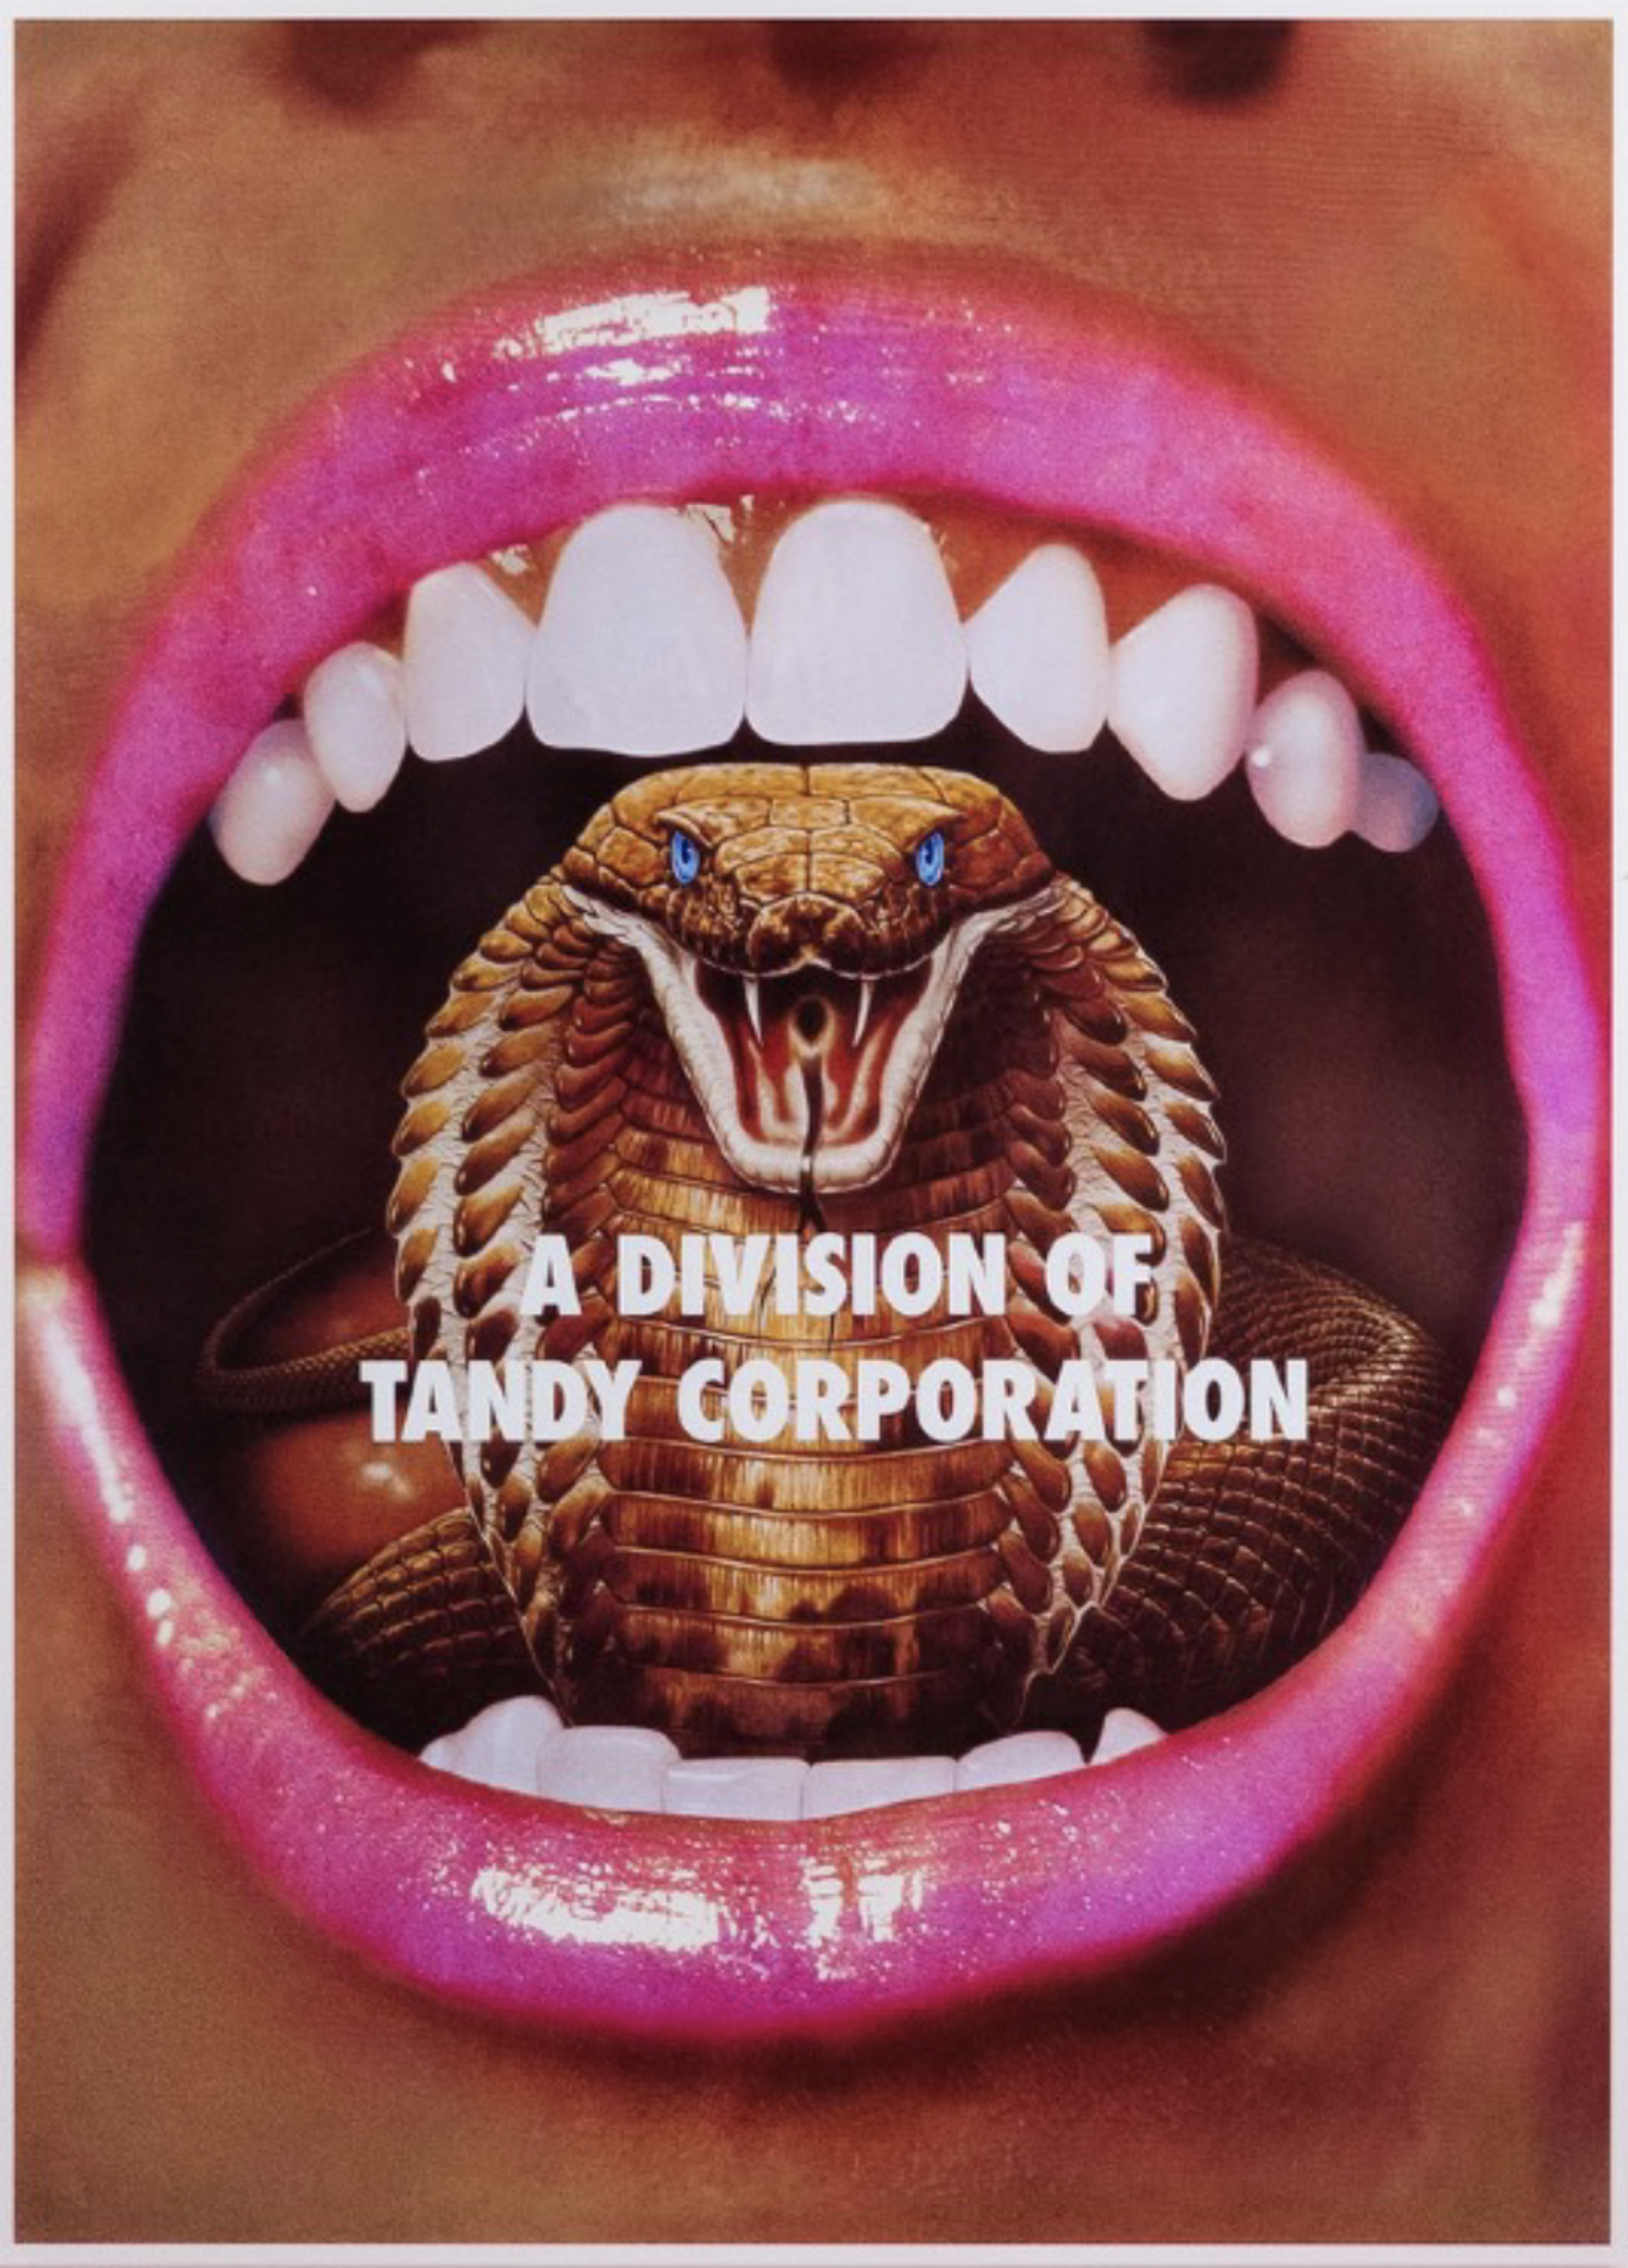 A Division of Tandy Corporation by Reed Weily